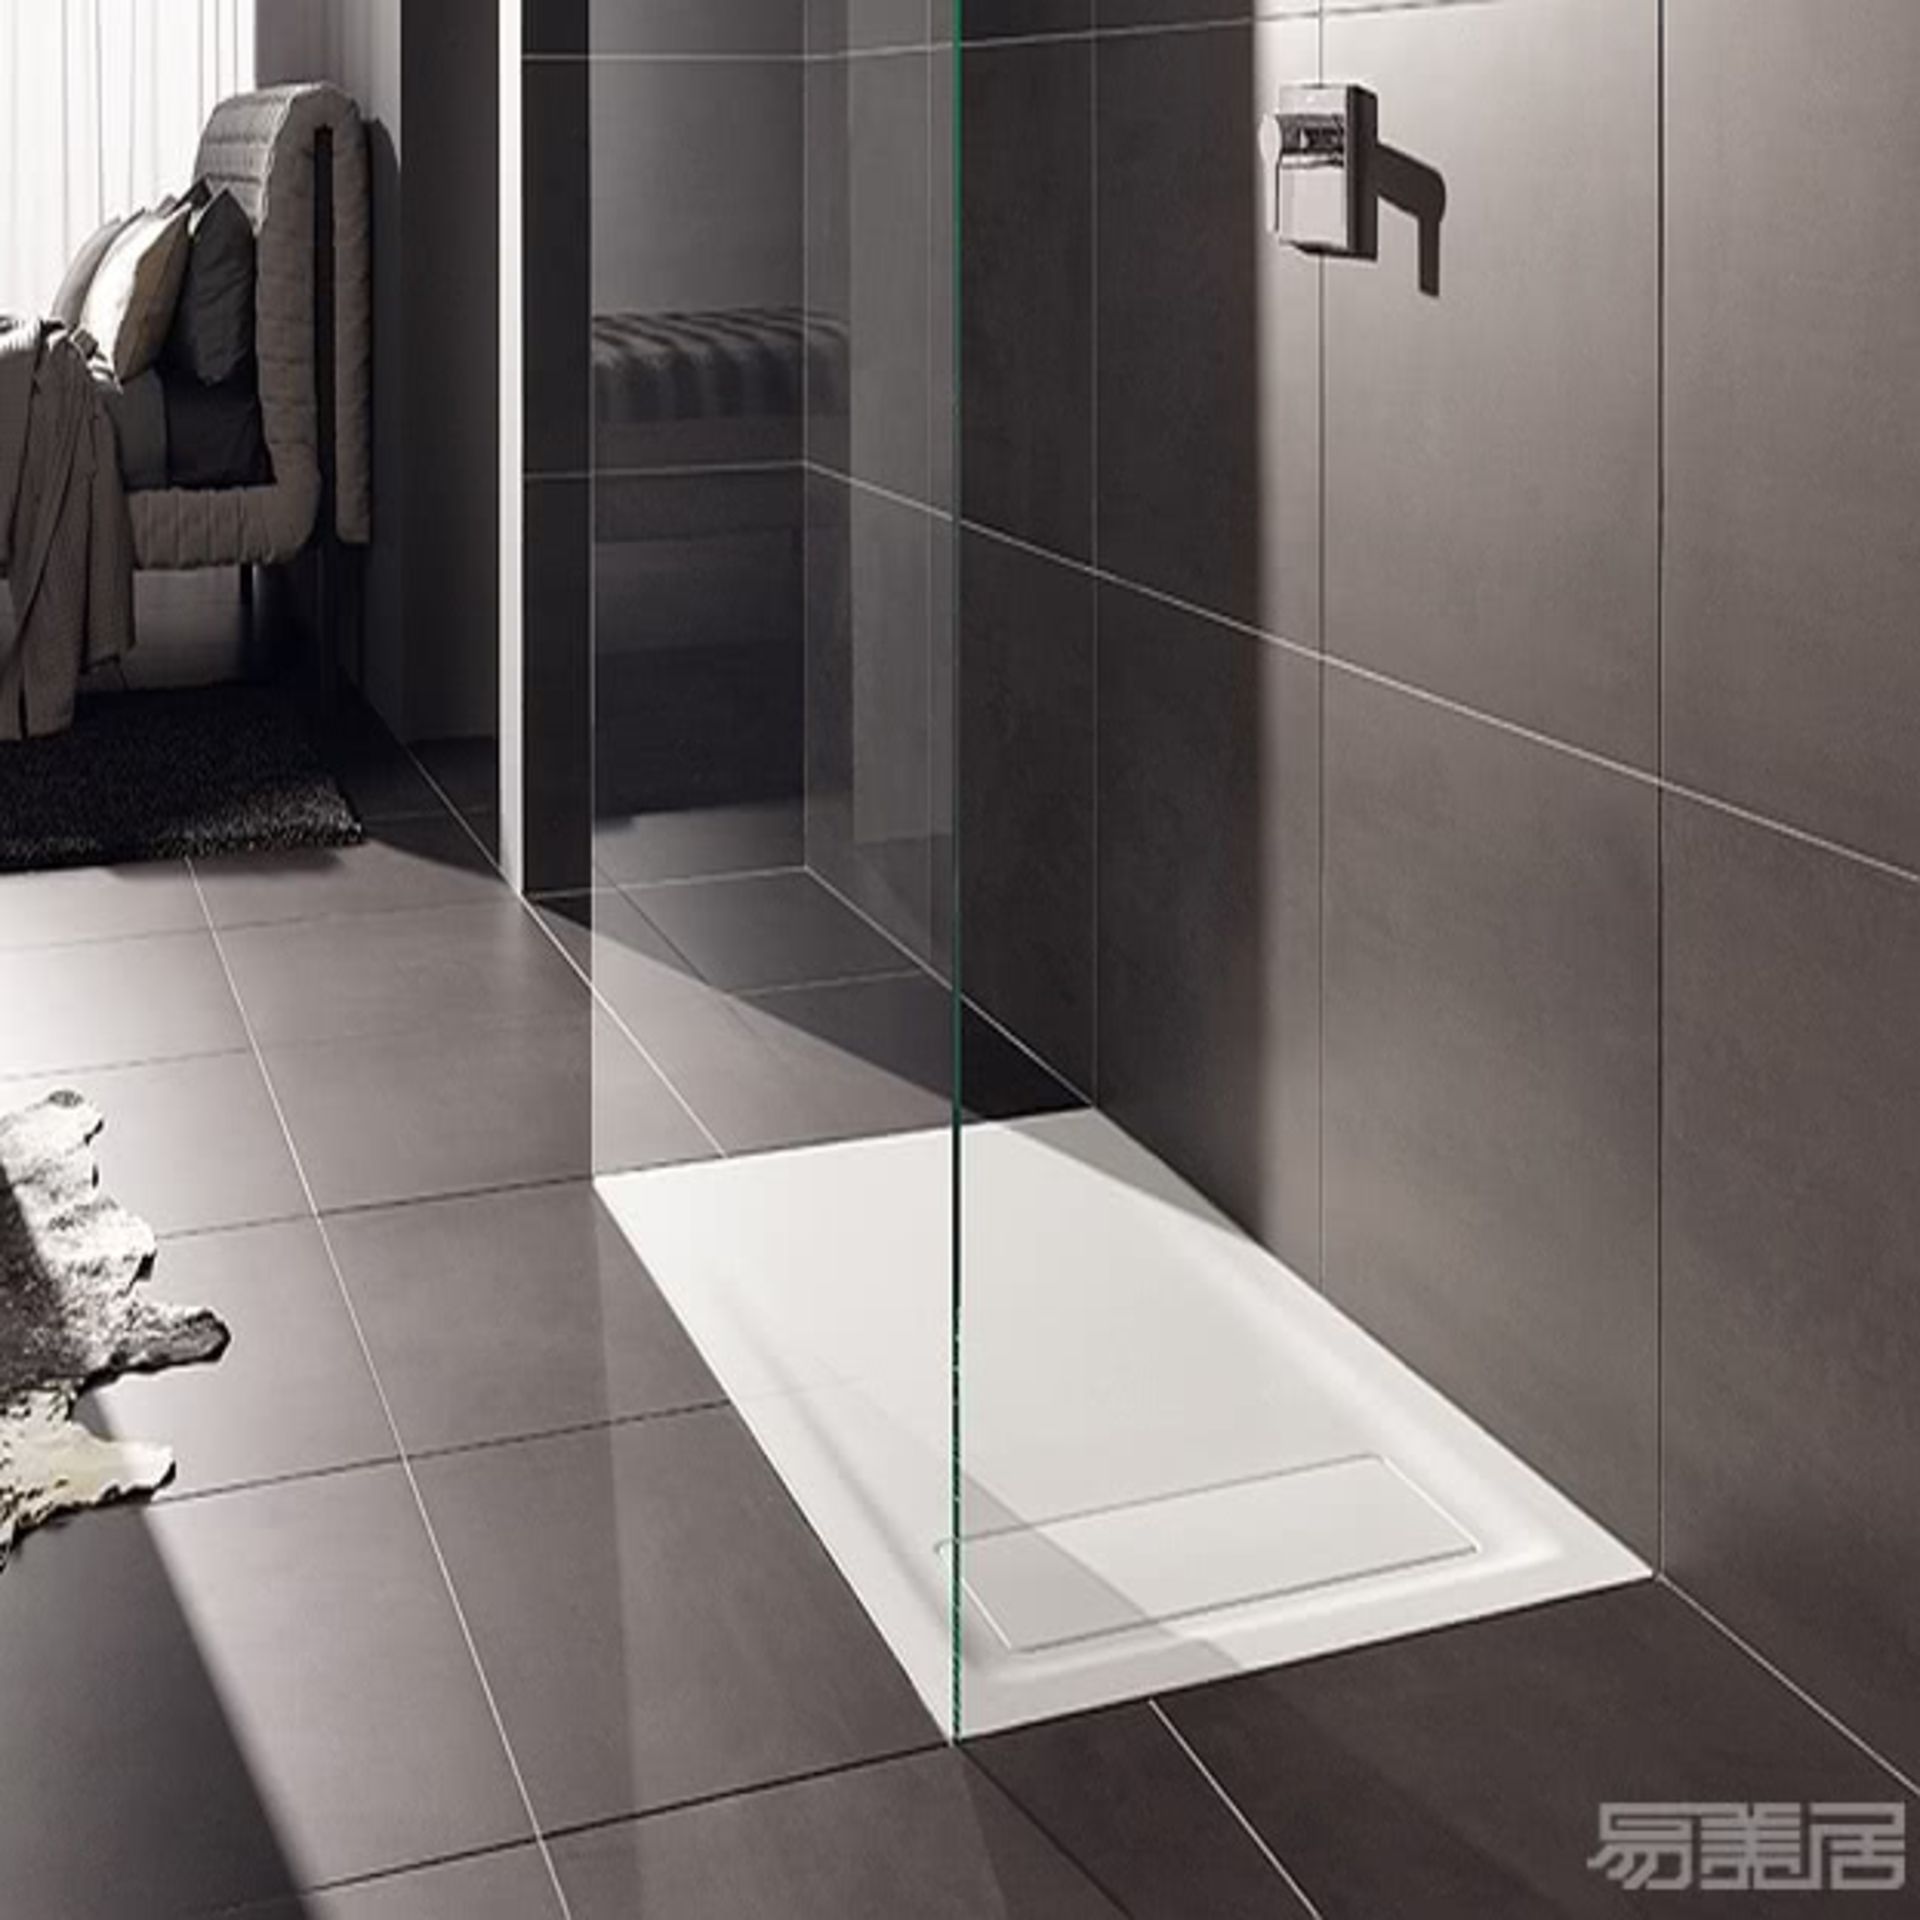 (VD145) Keramag 1600x900mm Opale White Shower Tray. RRP £1,485.99.Opale is sober, slender and...